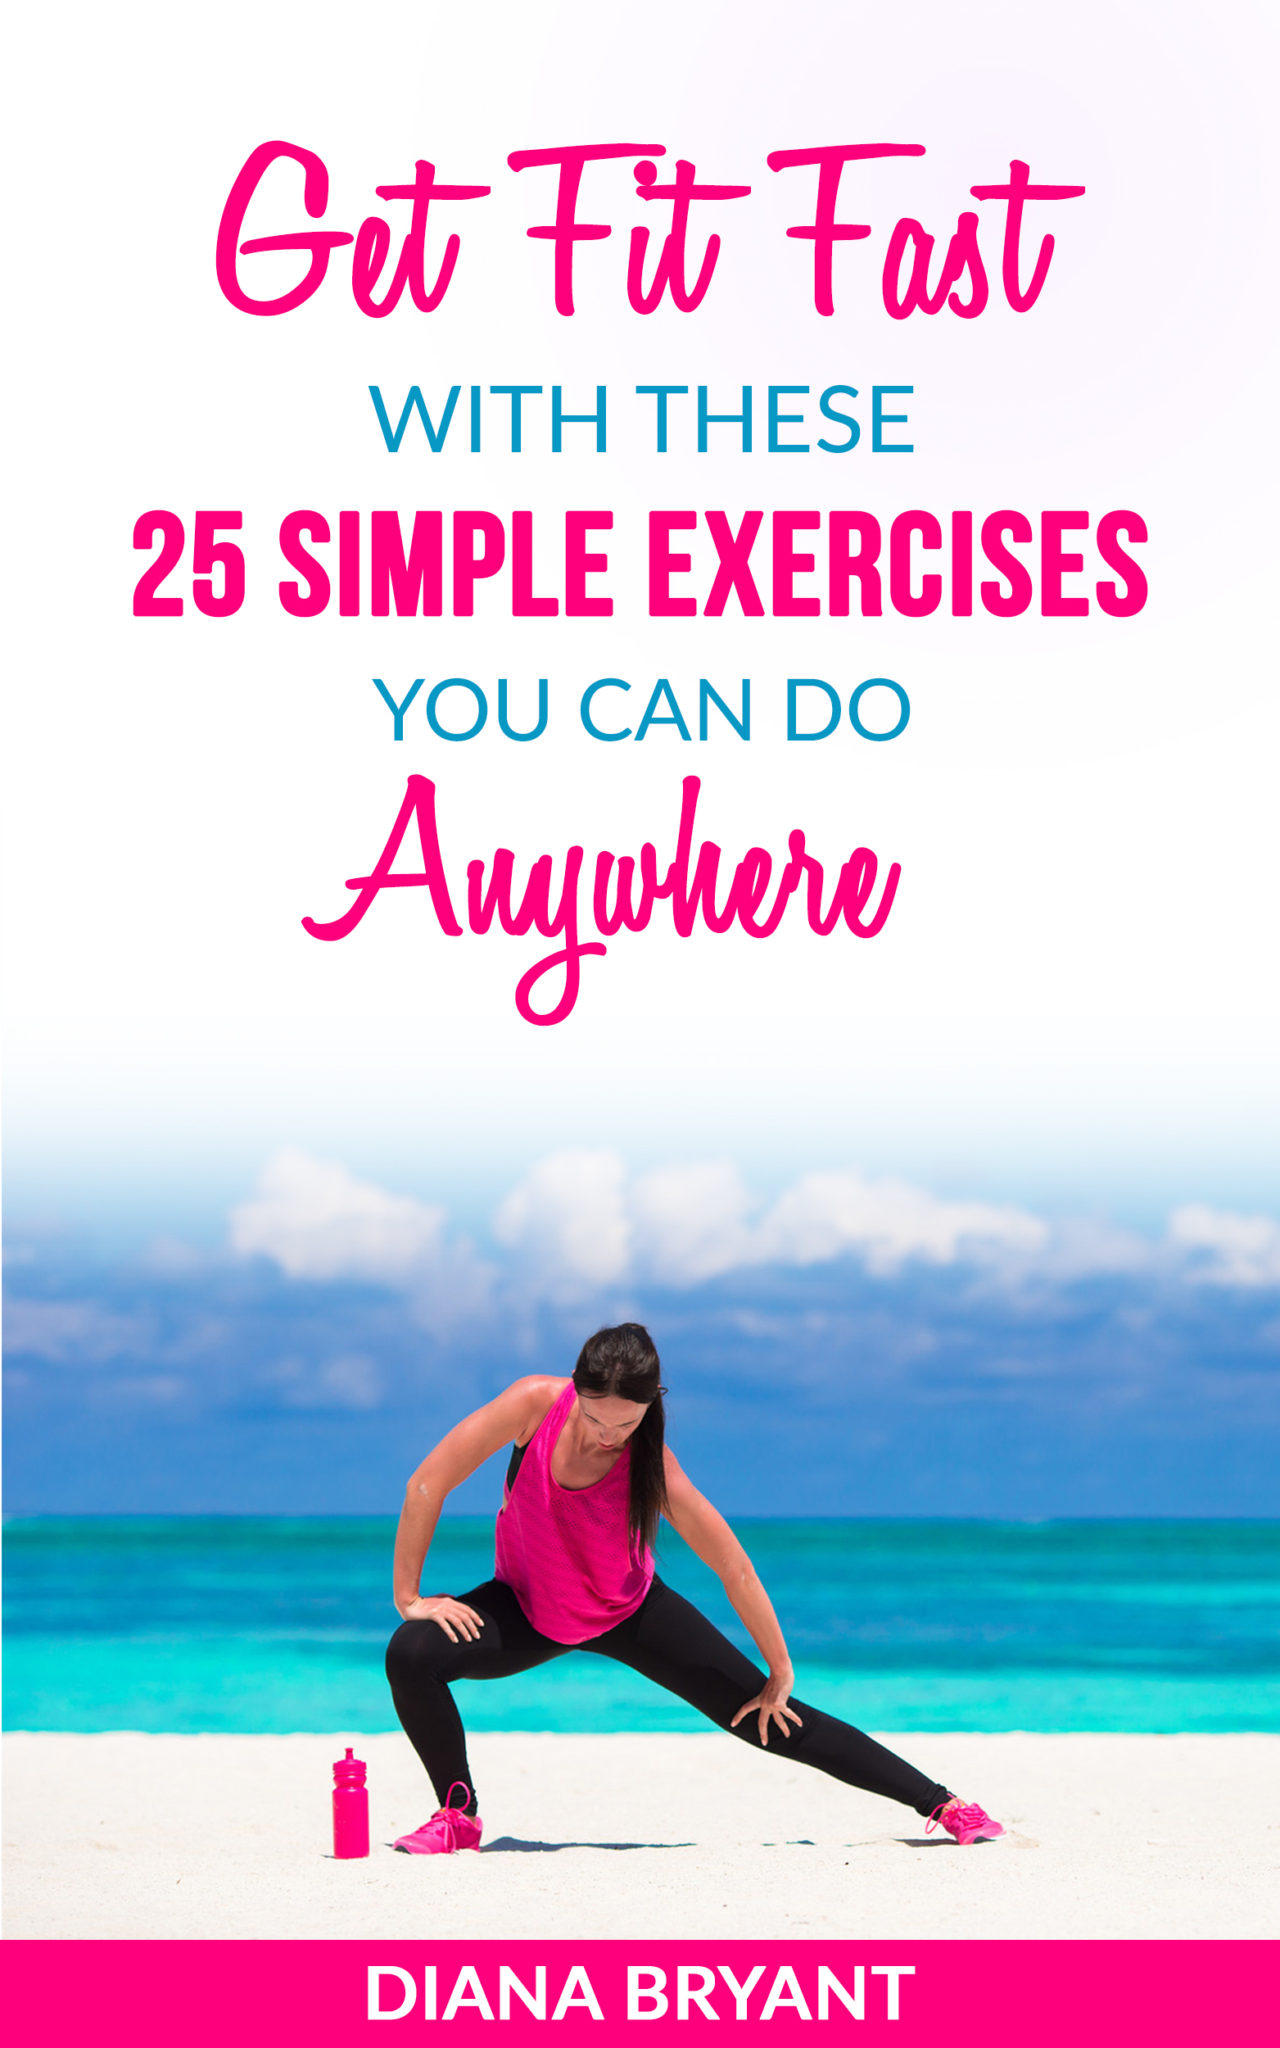 FREE: Get Fit Fast With These 25 Simple Exercises You Can Do Anywhere by Diana Bryant